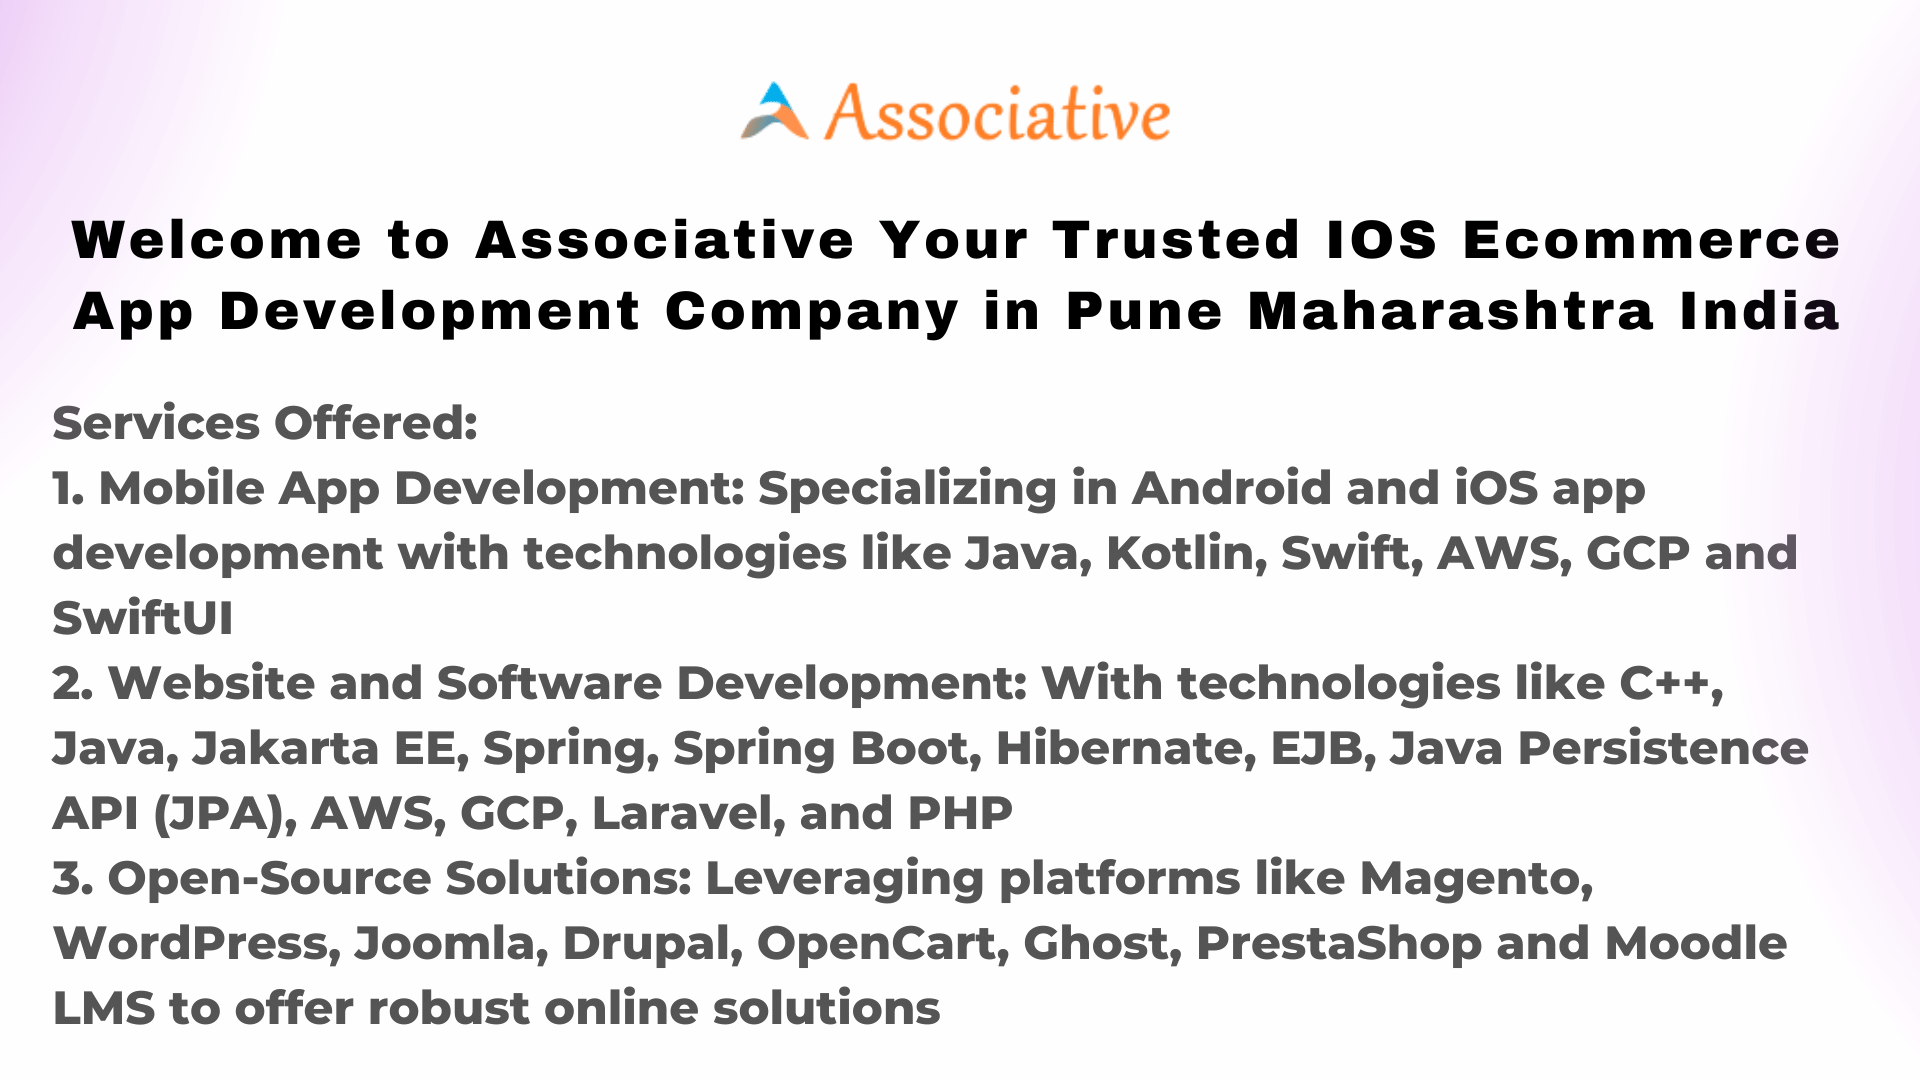 Welcome to Associative Your Trusted IOS Ecommerce App Development Company in Pune Maharashtra India